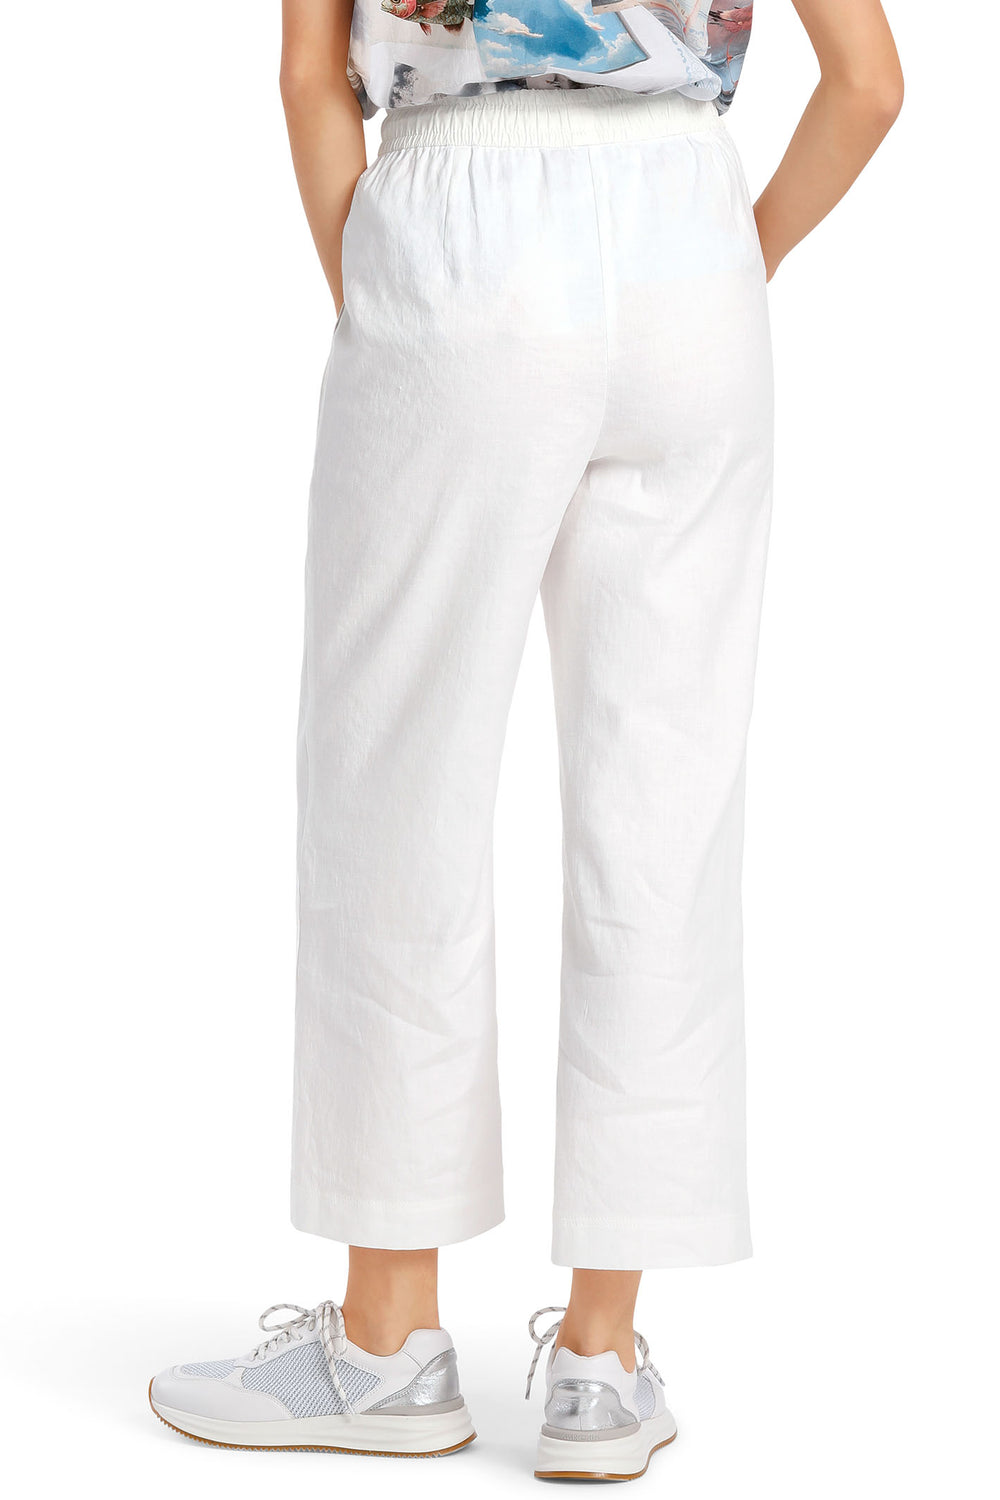 Marc Cain Sports WS 81.47 W03 100 White Cropped Drawstring Trousers - Olivia Grace Fashion